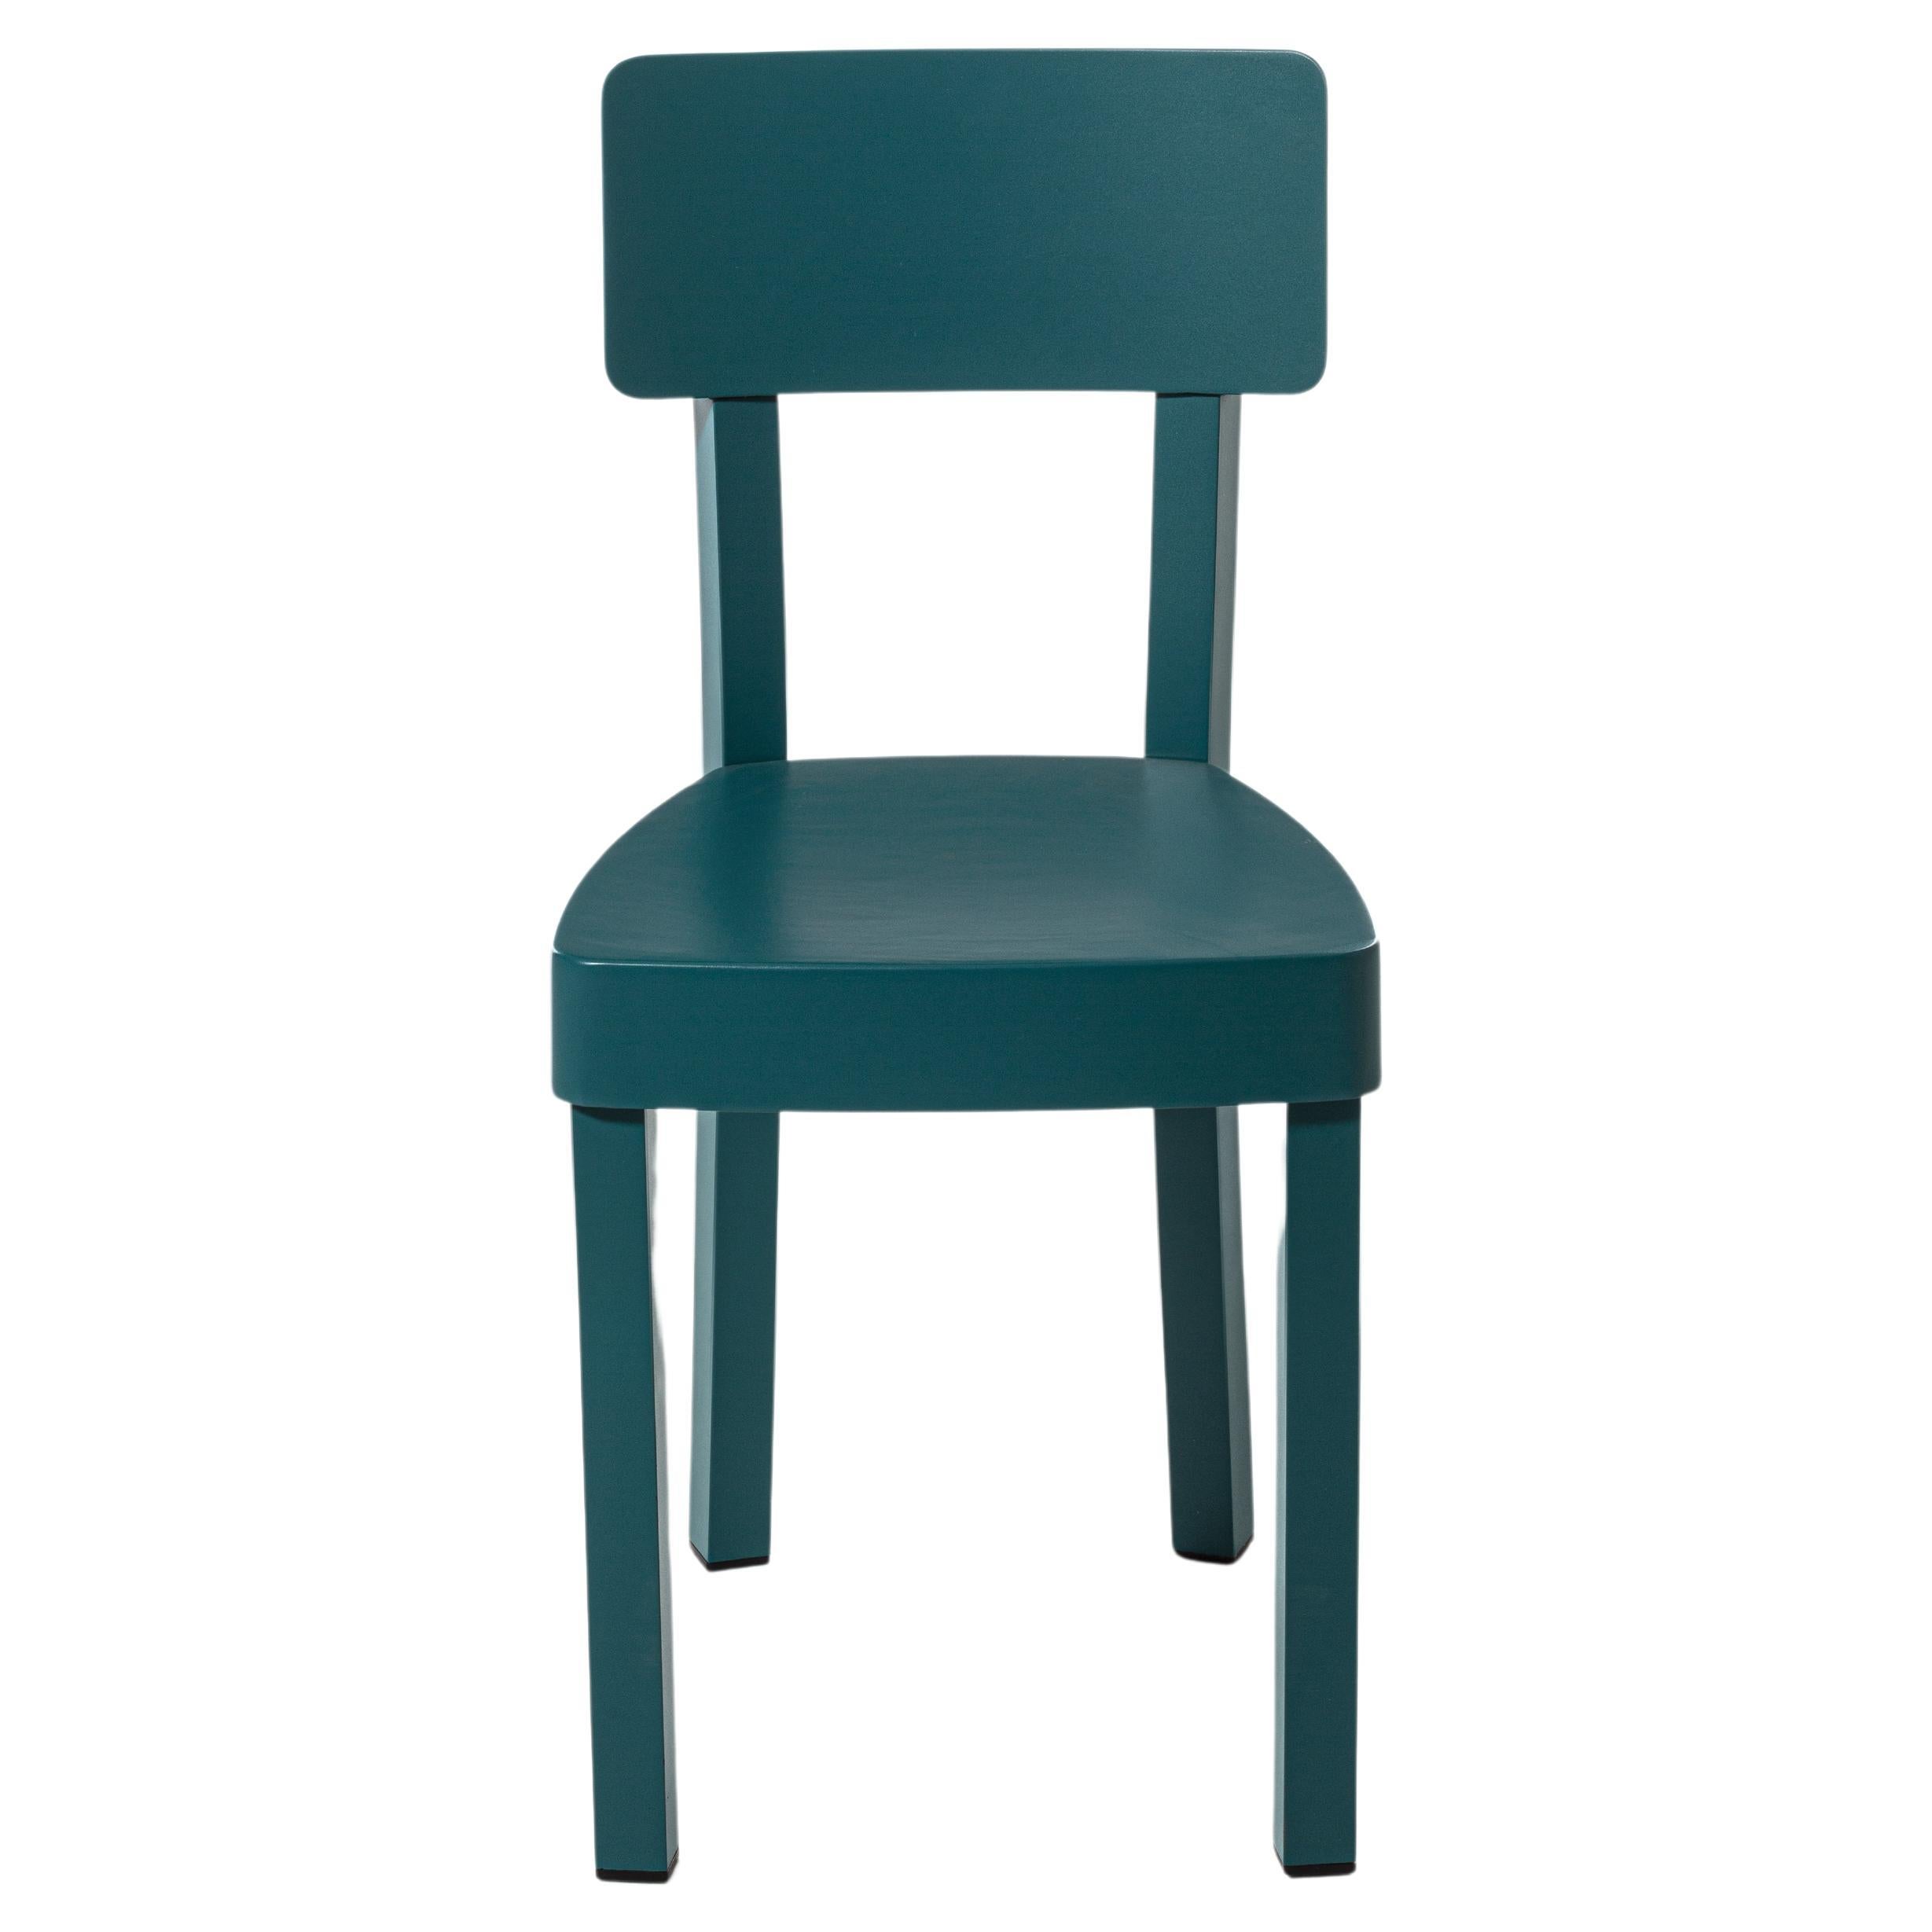 Gervasoni Inout 23 Outdoor Chair in Teal Lacquered Aluminum by Paola Navone For Sale